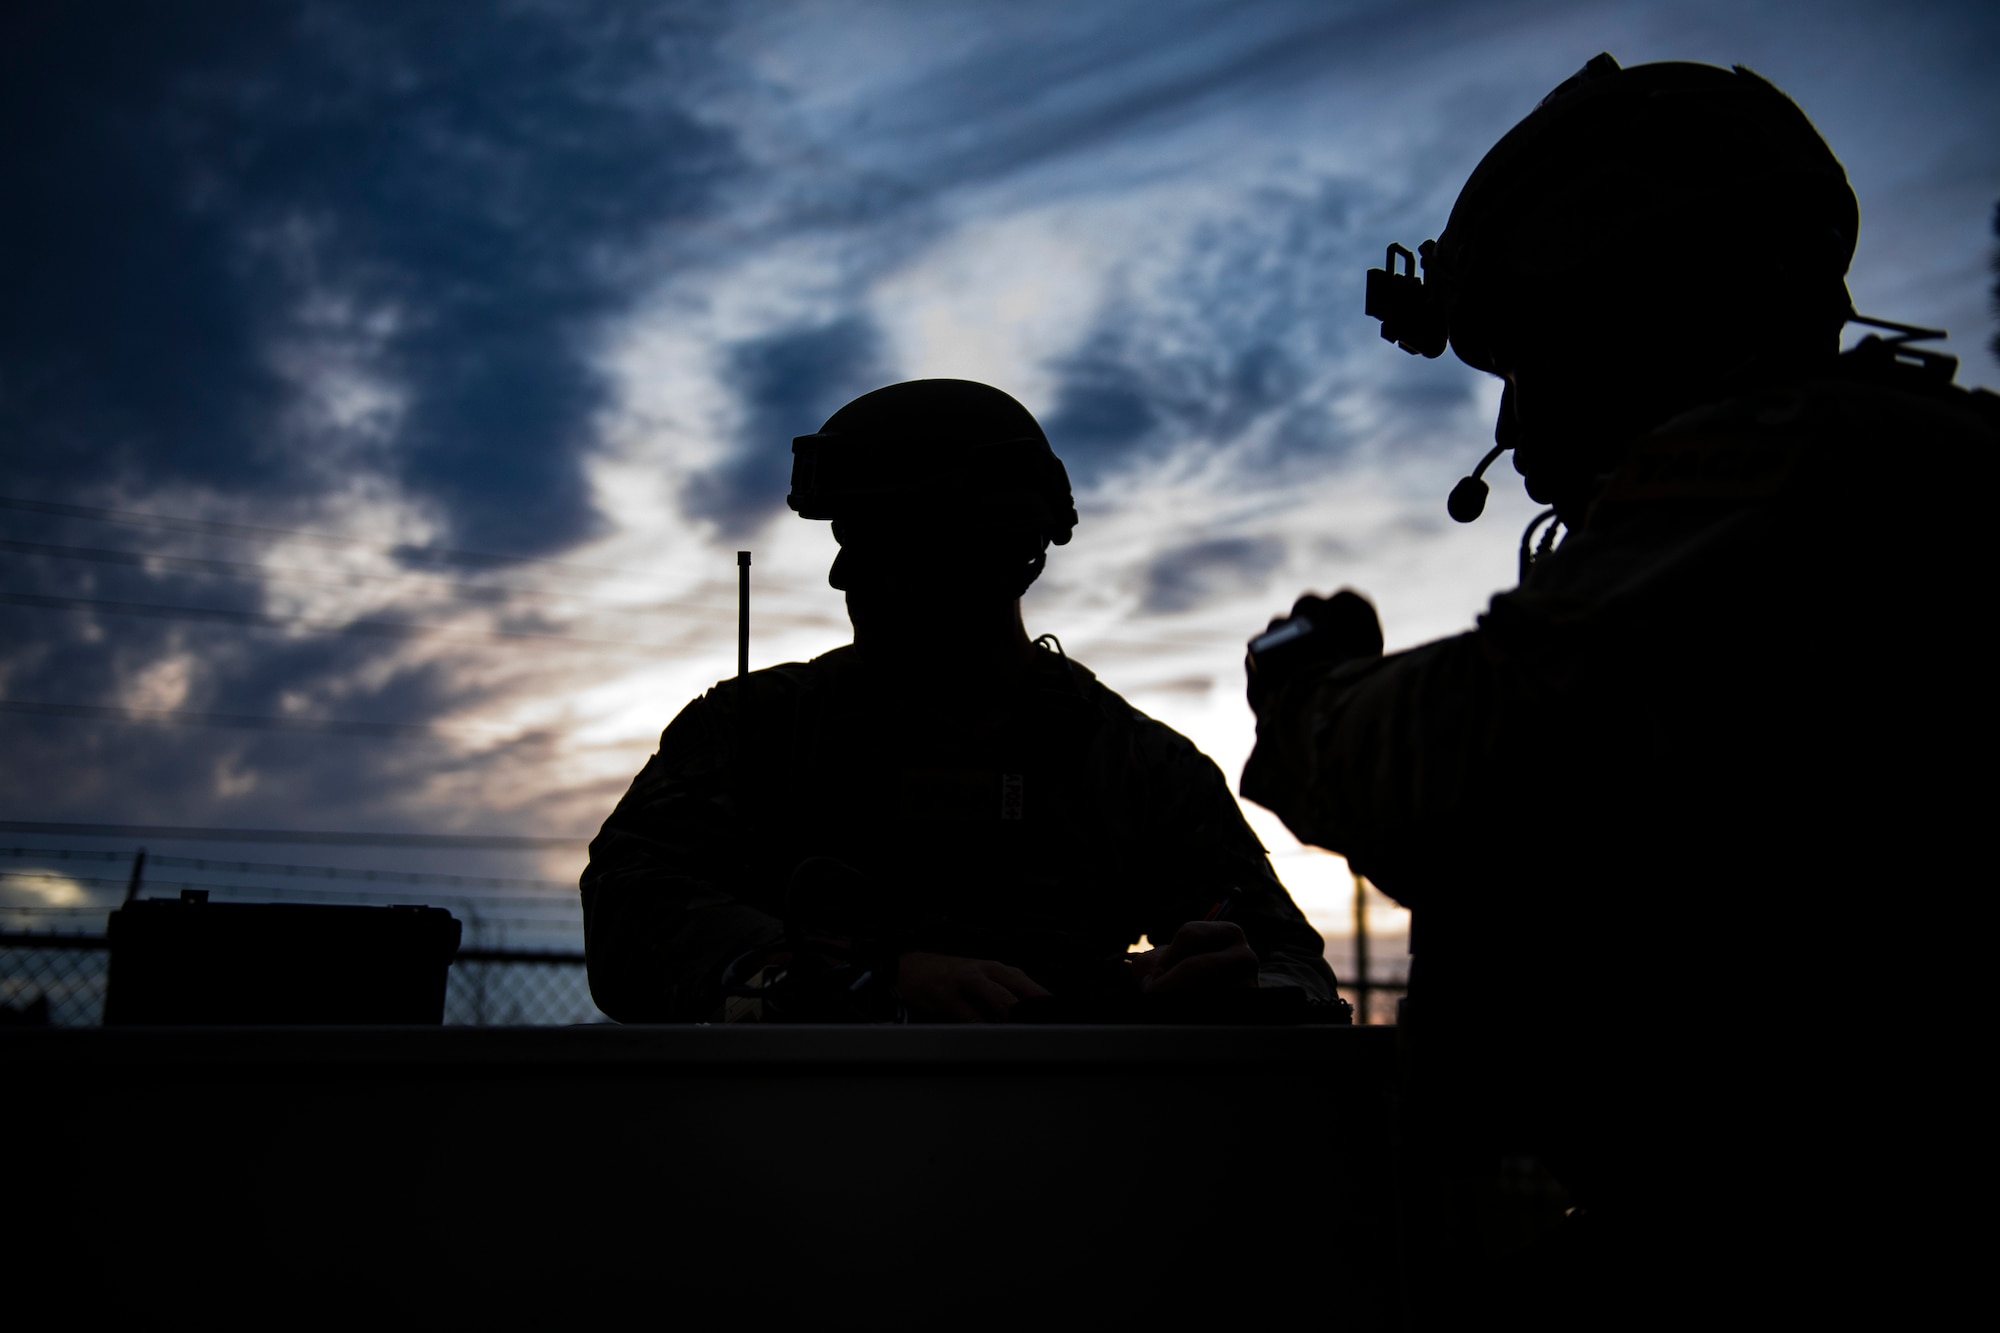 Staff Sgt. Jeffrey Blevins, left, and Senior Airman Parris Holmes, both 7th Air Support Operations Squadron joint terminal attack controllers, await the arrival of aircraft to their location, Nov. 8,2016, at Homerville, Ga. The 7th ASOS was among several Air Force units nationwide assigned to the 93d Air Ground Operations Wing to assist the 23d Fighter Groups’ A-10C Thunderbolt II close-air support flying mission. (U.S. Air Force photo by Airman 1st Class Daniel Snider)